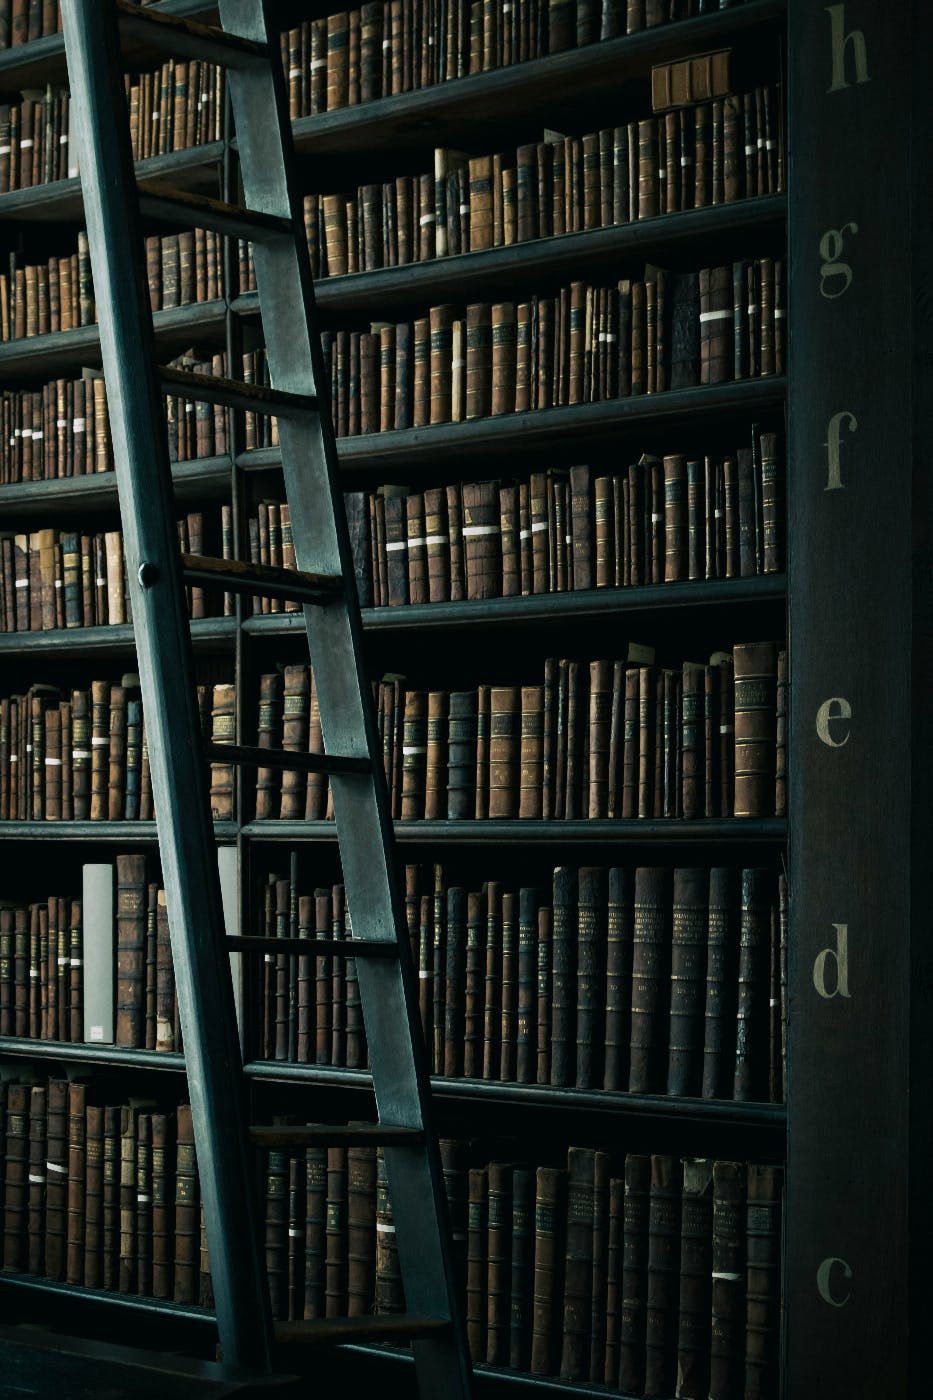 Books shelves in a library and a ladder